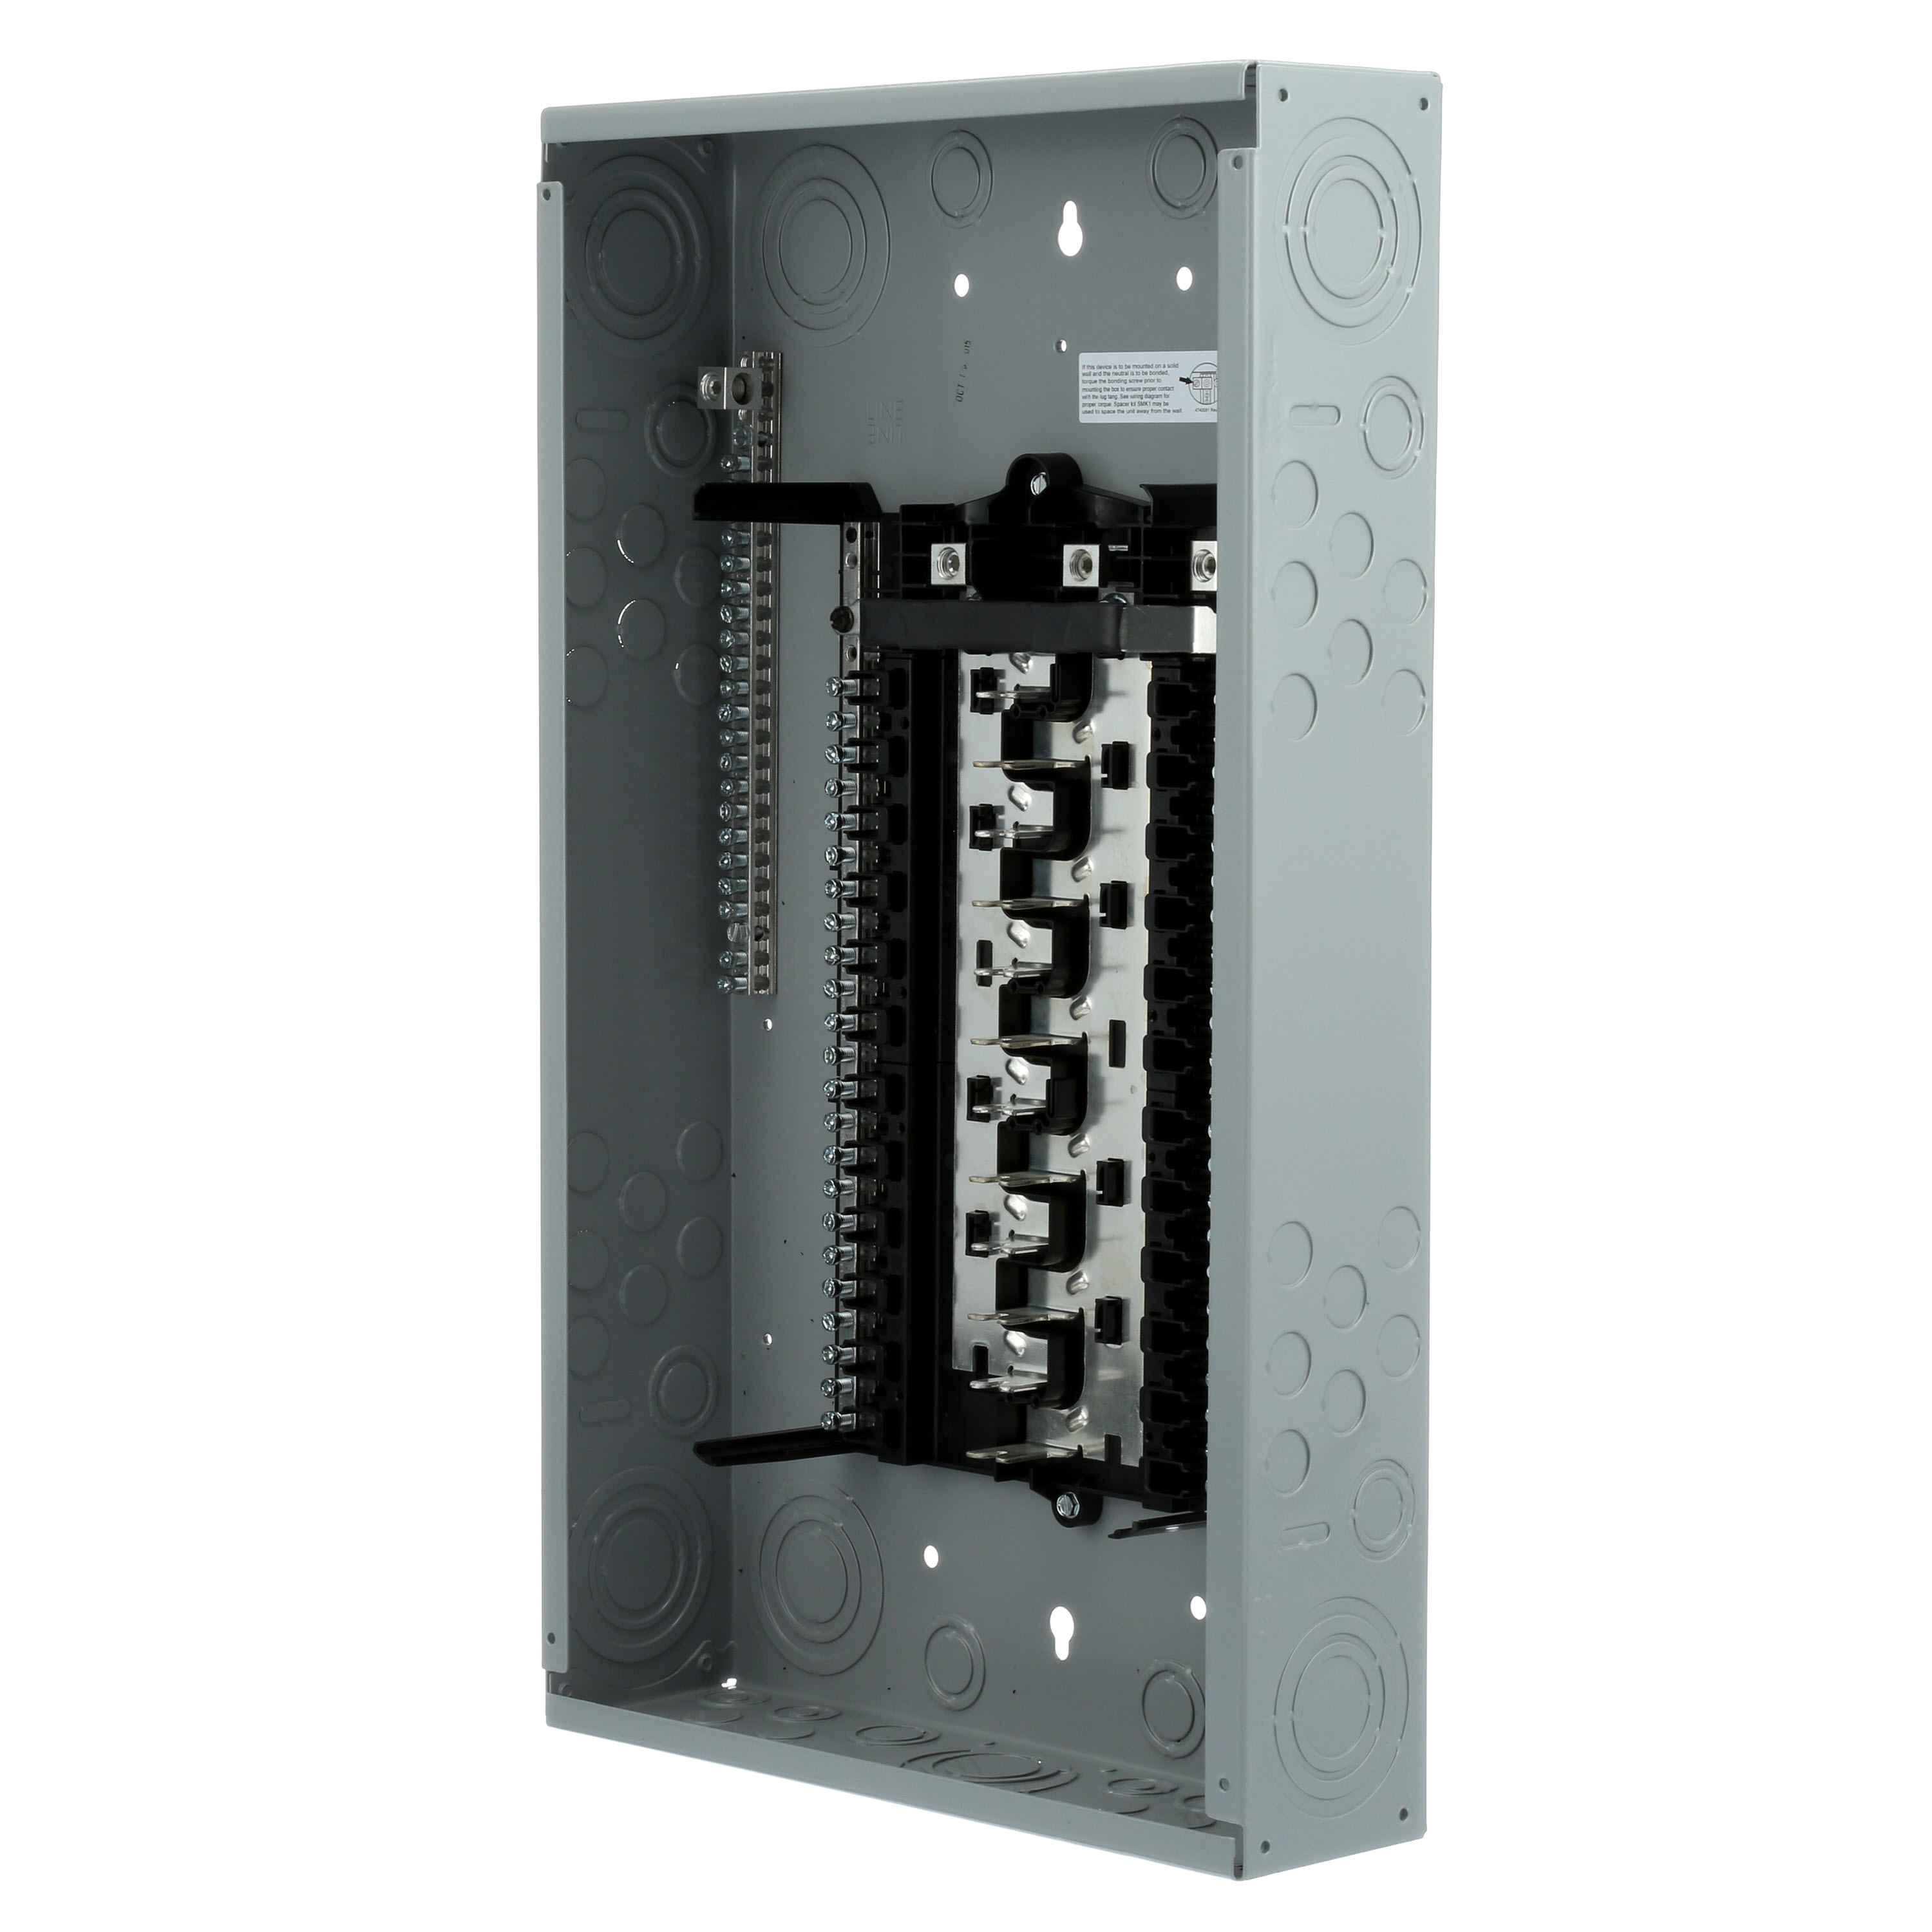 SIEMENS LOW VOLTAGE ES SERIES LOAD CENTER. MAIN LUG WITH 24 1-INCHSPACES ALLOWING MAX 48 CIRCUITS. 1-PHASE 3-WIRE SYSTEM RATED 120/240V(125A) 100KA INTERRUPT. SPECIAL FEATURES ALUMINUM BUS, FACTORYINSTALLED GROUND BAR, WIREGUIDE INTERIOR FOR NEW AFCI/GFCI BREAKERS,GRAY TRIM, NEMA TYPE1 ENCLOSURE FOR INDOOR USE.. REPLACED BY SN2448L1125. AVAILABLE 4/1/2020